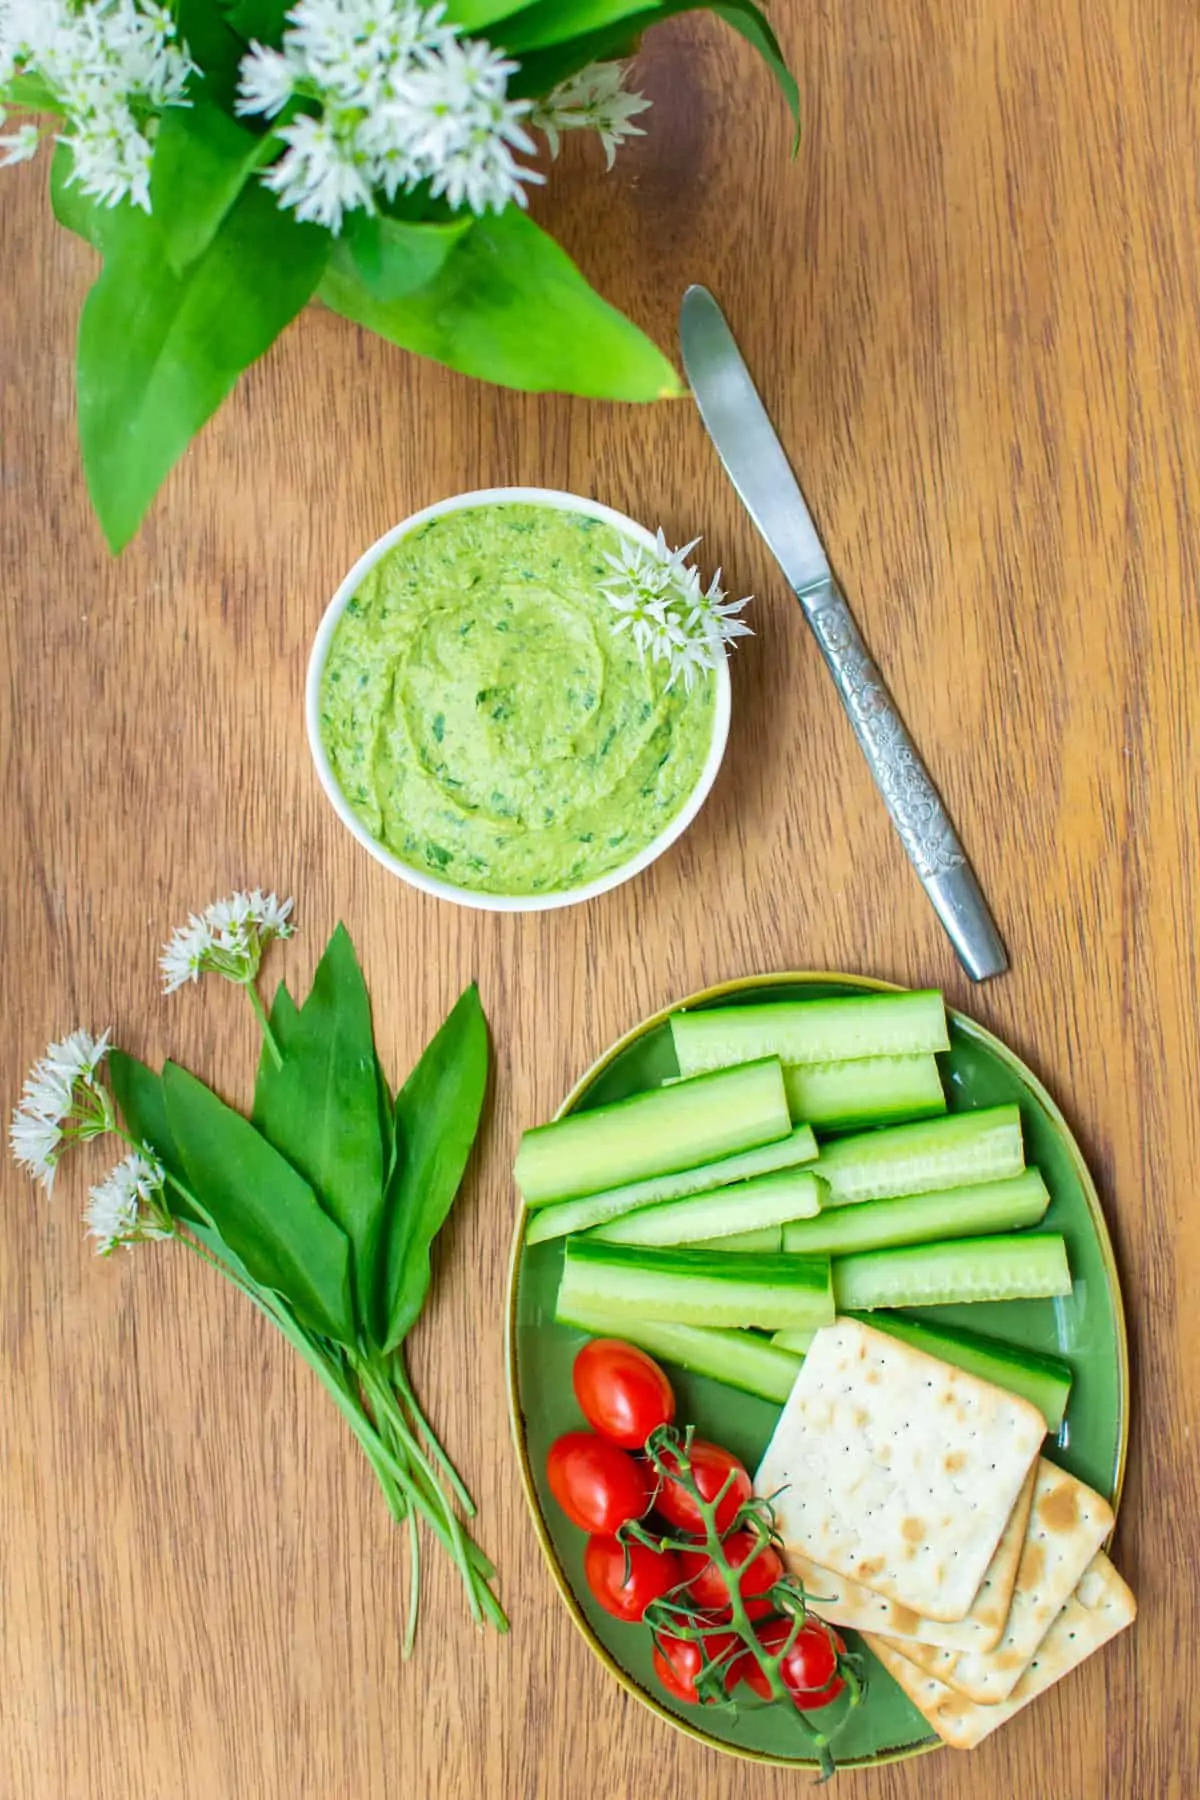 A bowl of green hummus decorated with wild garlic flowers, next to a plate of crudités and crackers.